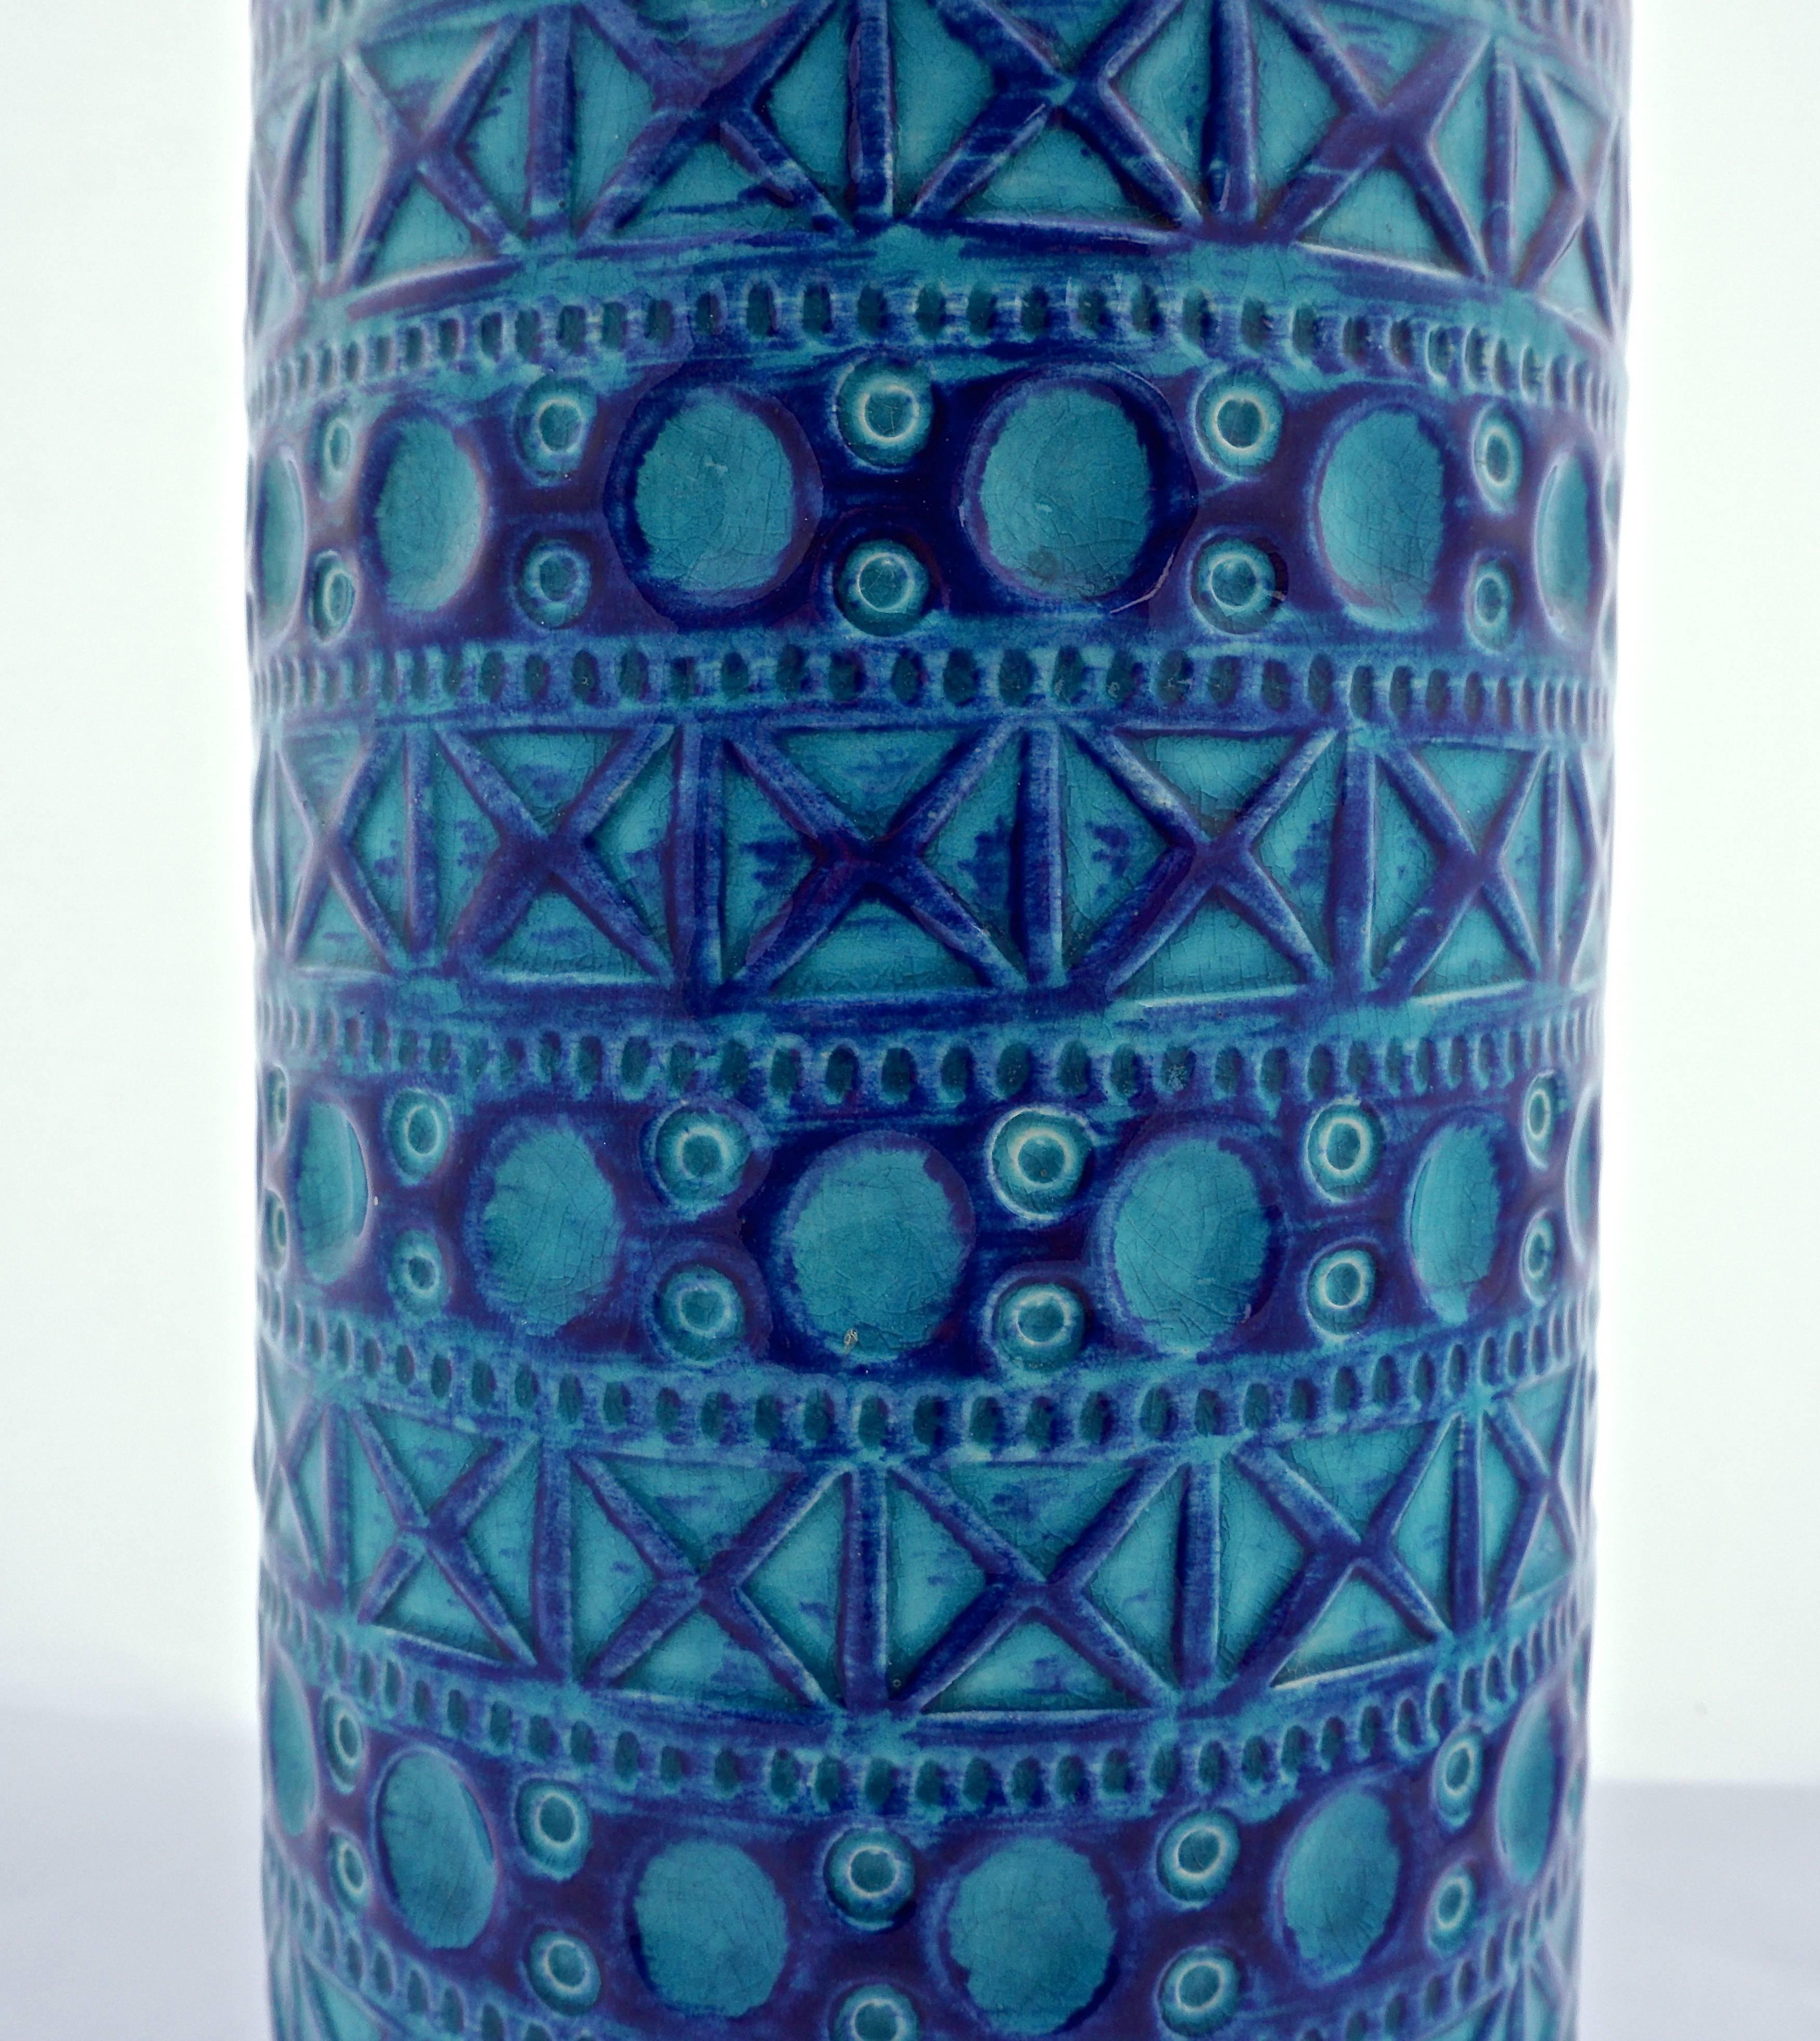 Women's or Men's Bay Keramik West Germany Large Pottery Blue and Turquoise Vase, circa 1970s